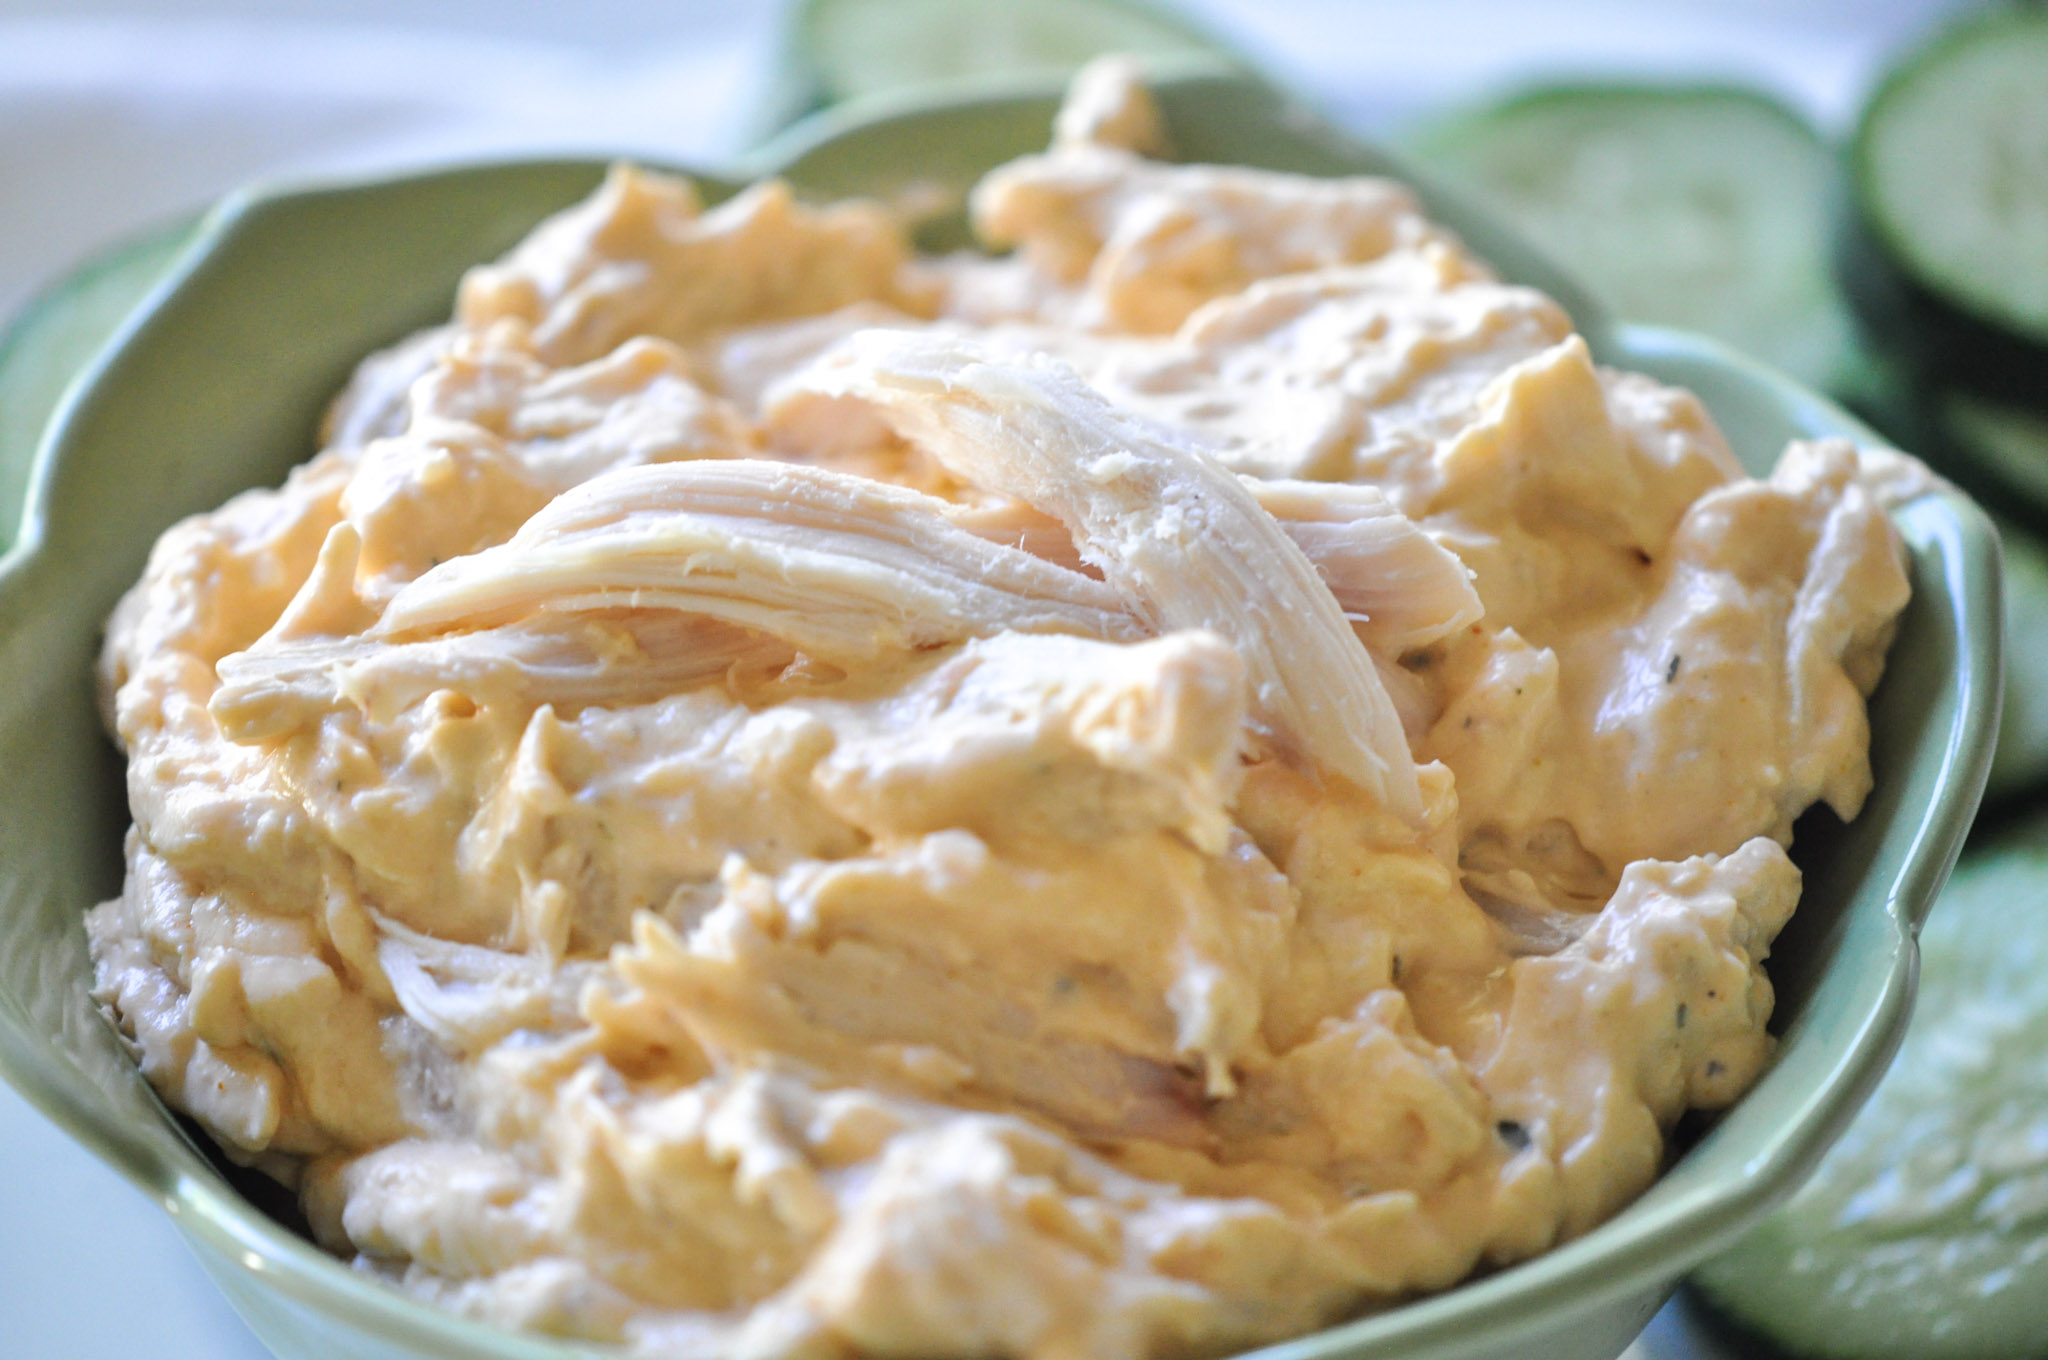 Best Buffalo Chicken Dip with Hot Wing Sauce Uses Rotisserie Chicken Breast